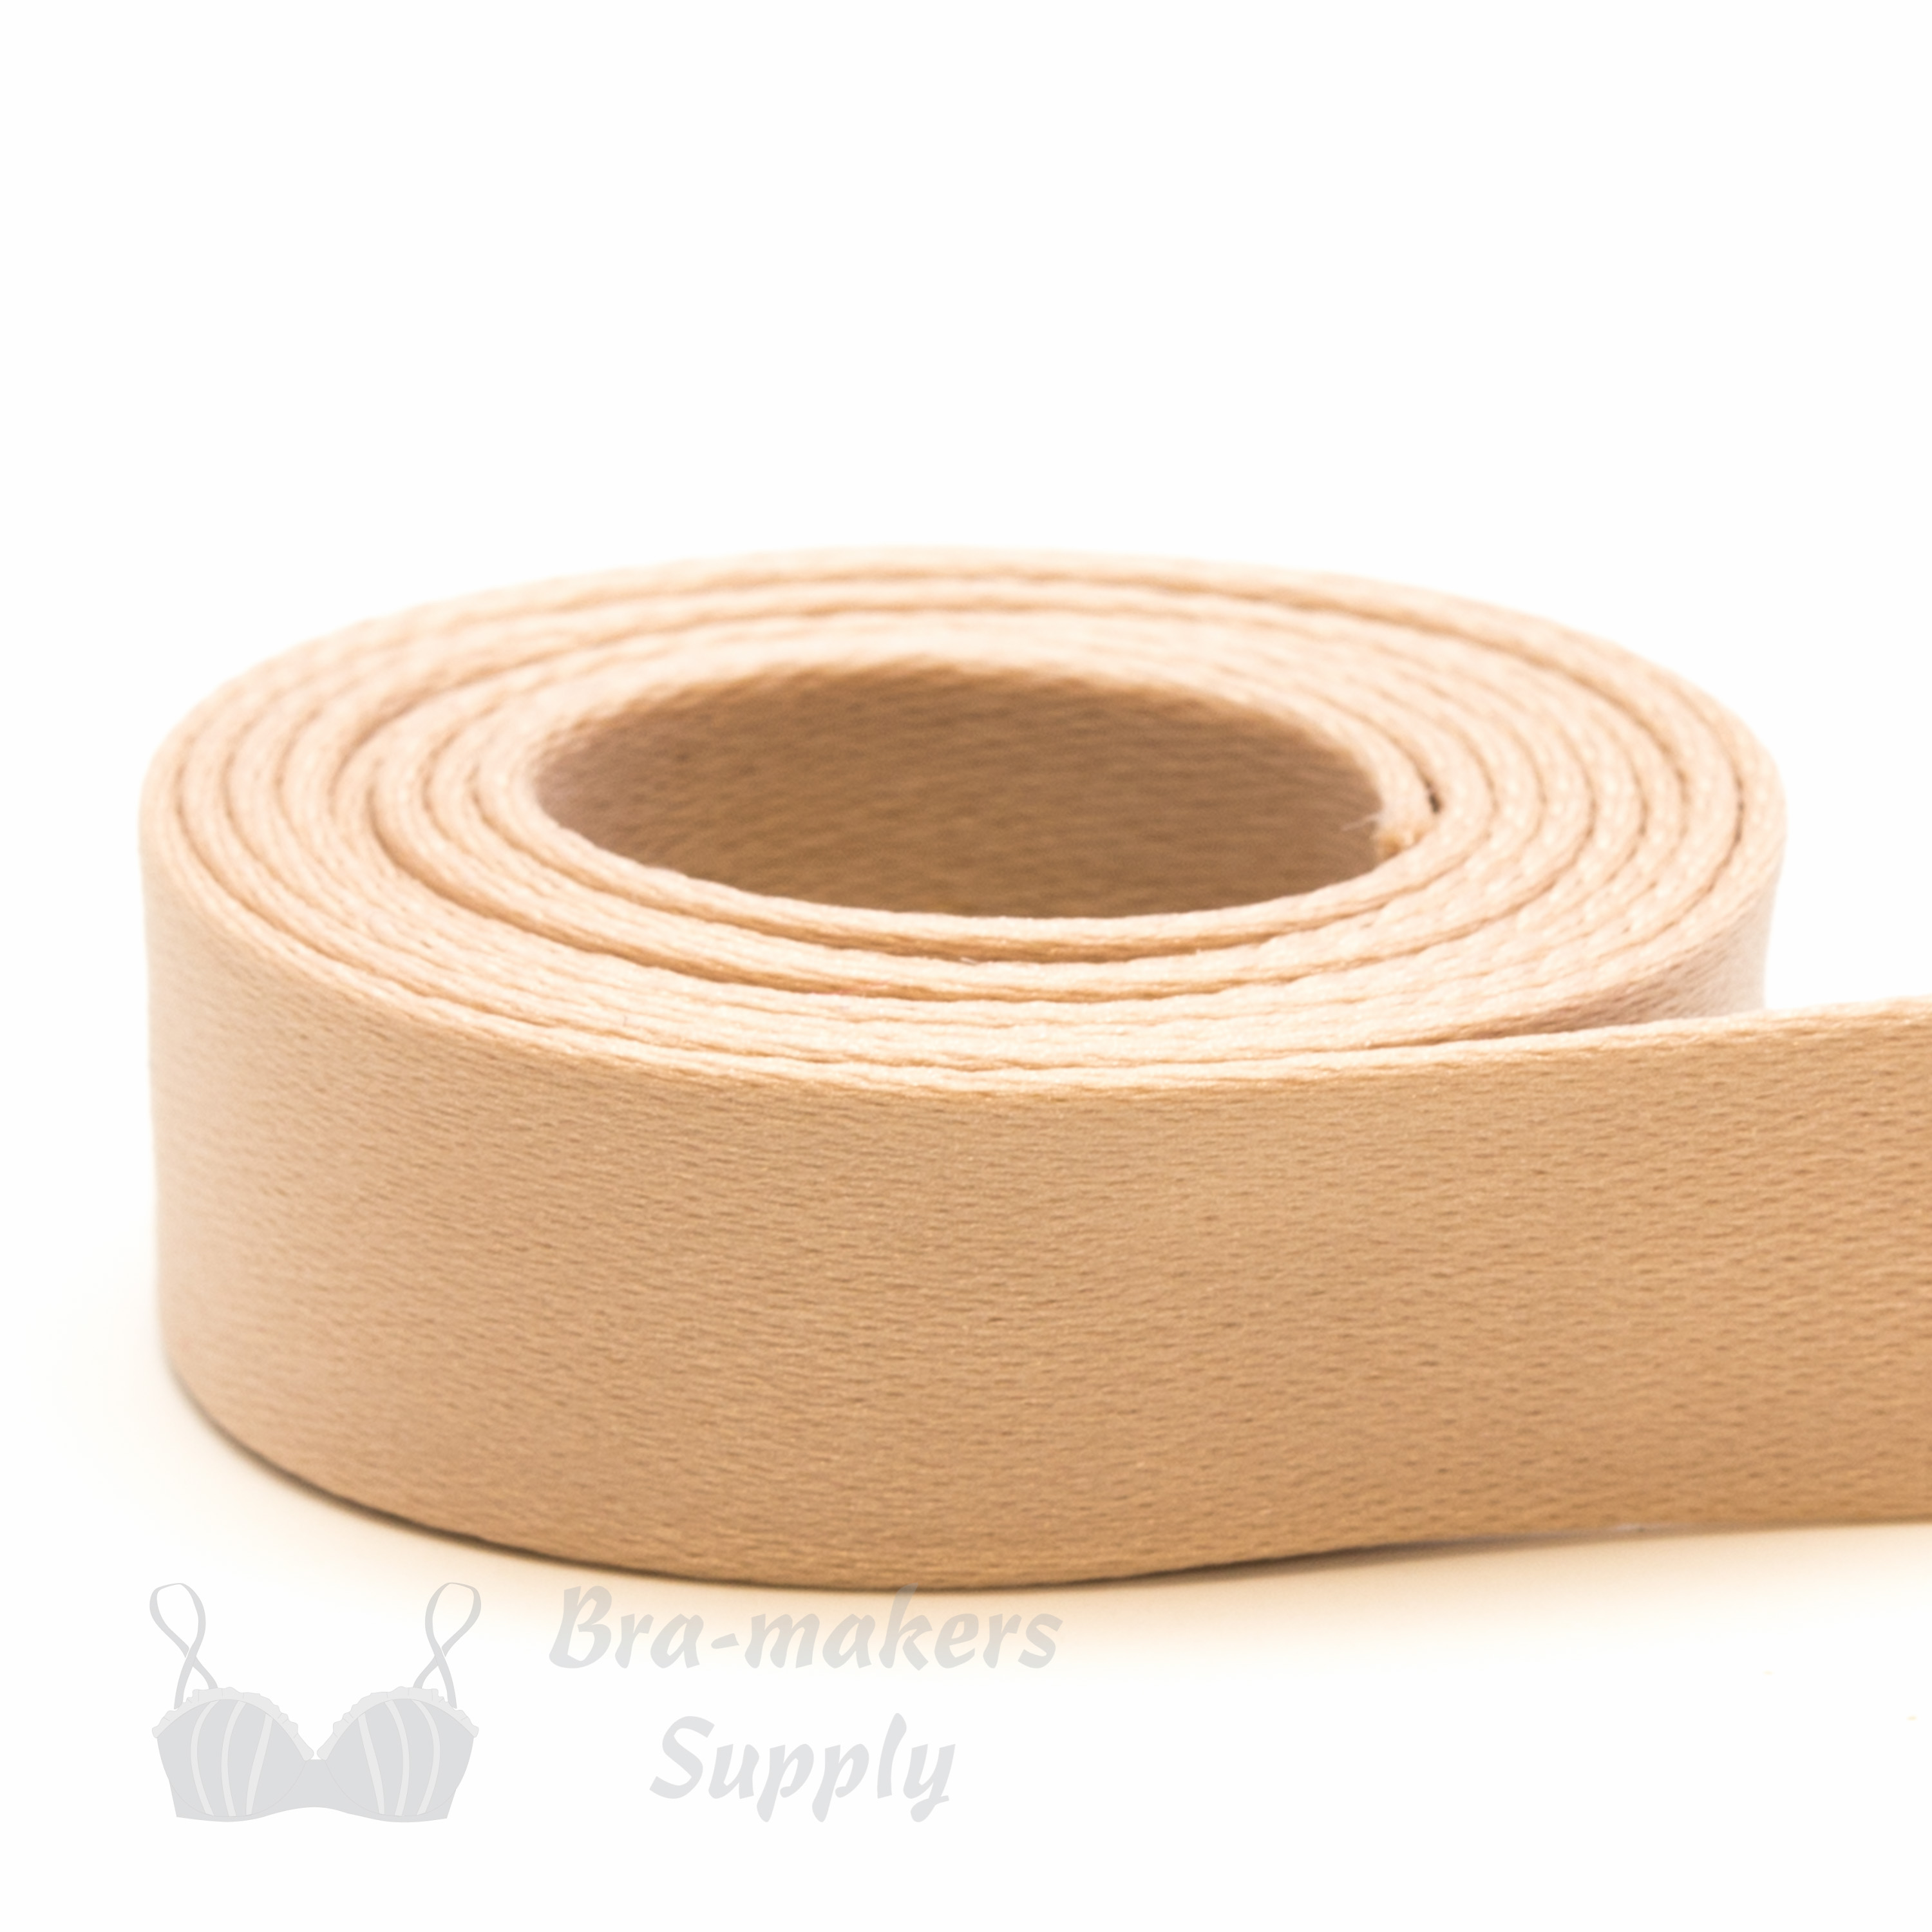 five eighths of an inch or 16 mm matte non-stretch bra strap tape ST-5 beige from Bra-Makers Supply 1 metre roll shown